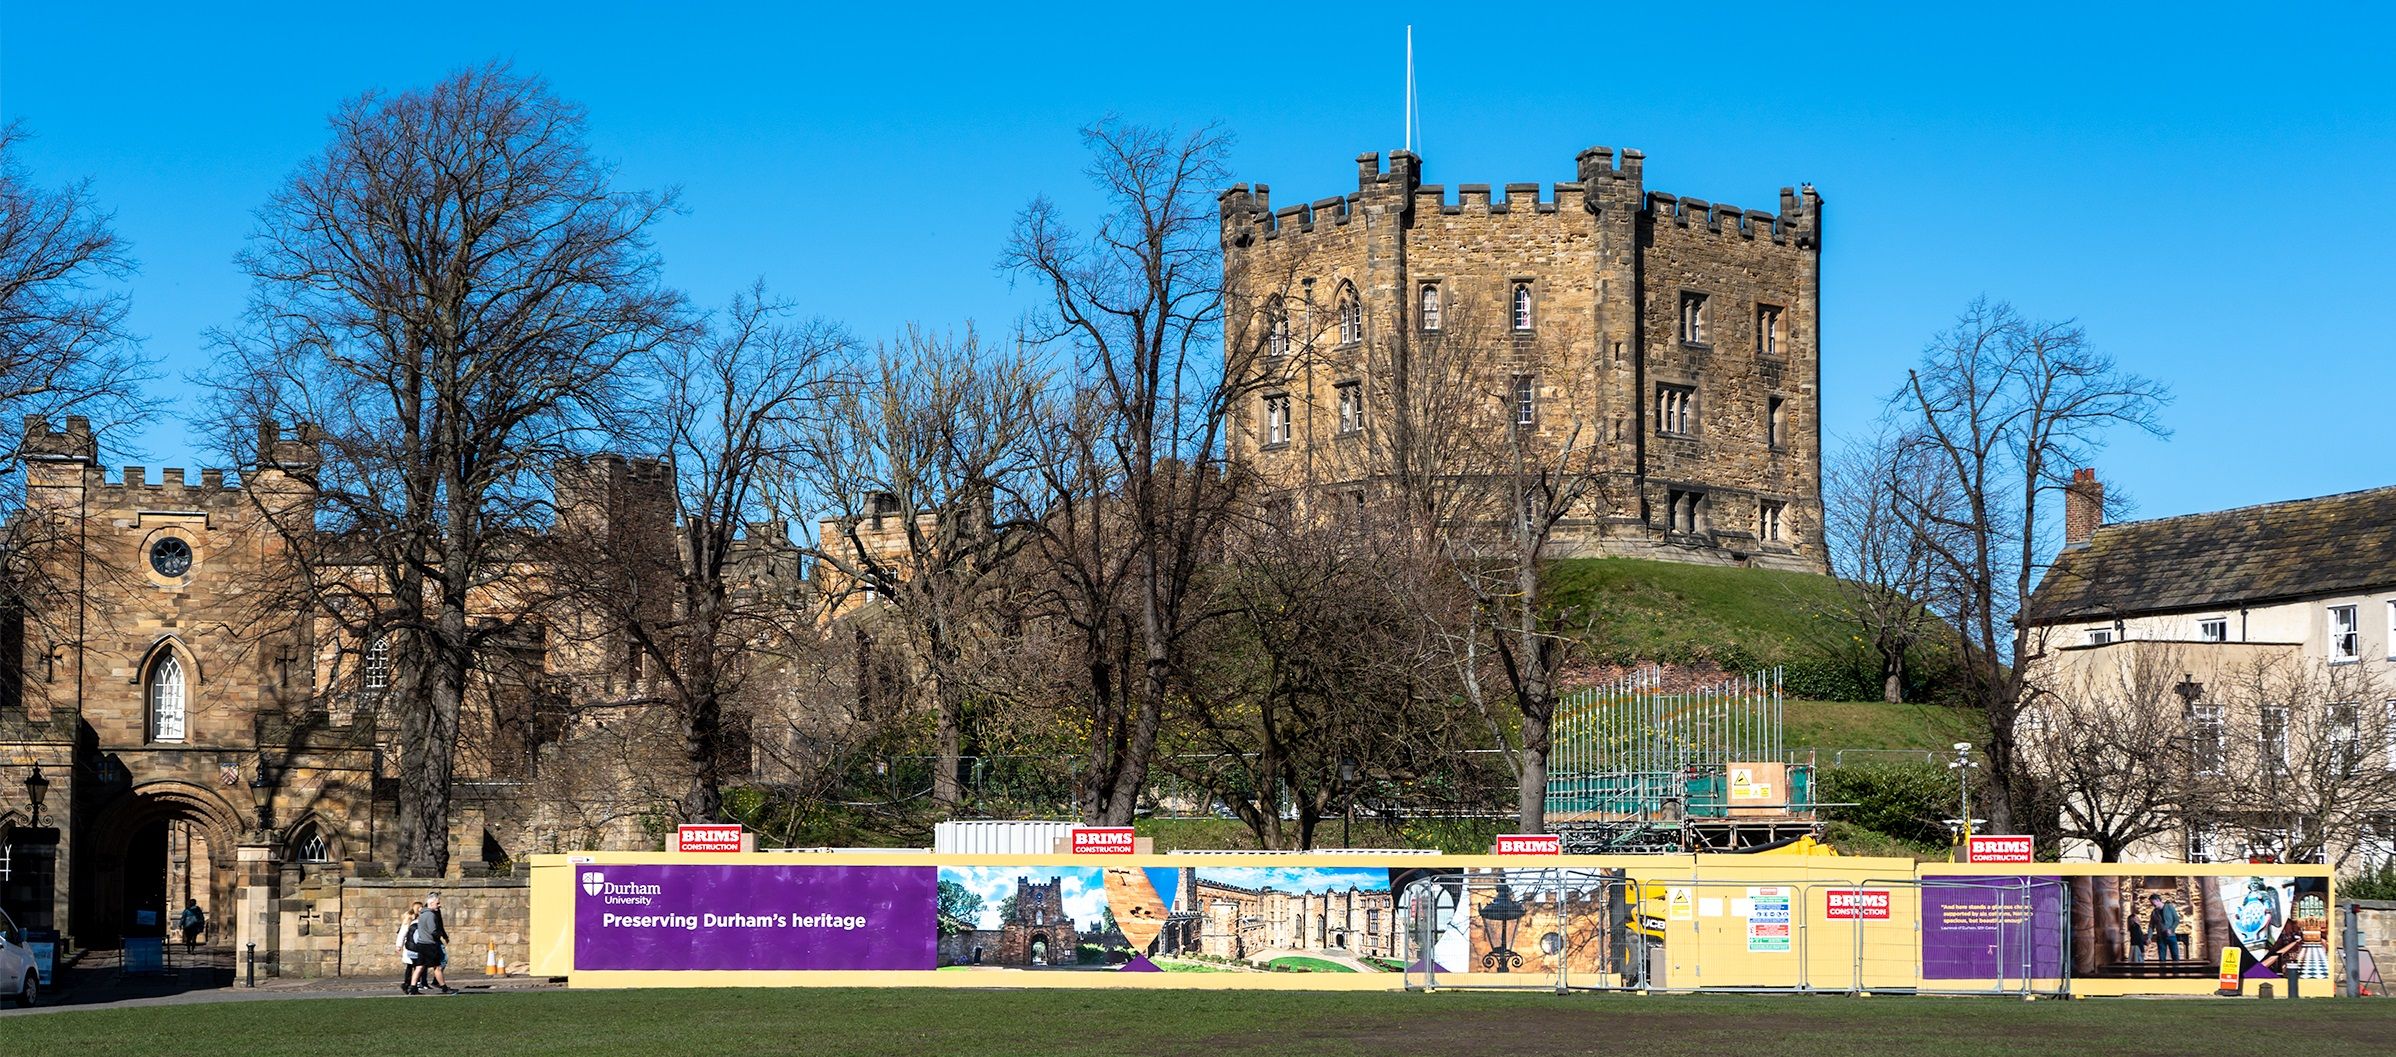 Norman Chapel Project Hoardings around Castle on Palace Green